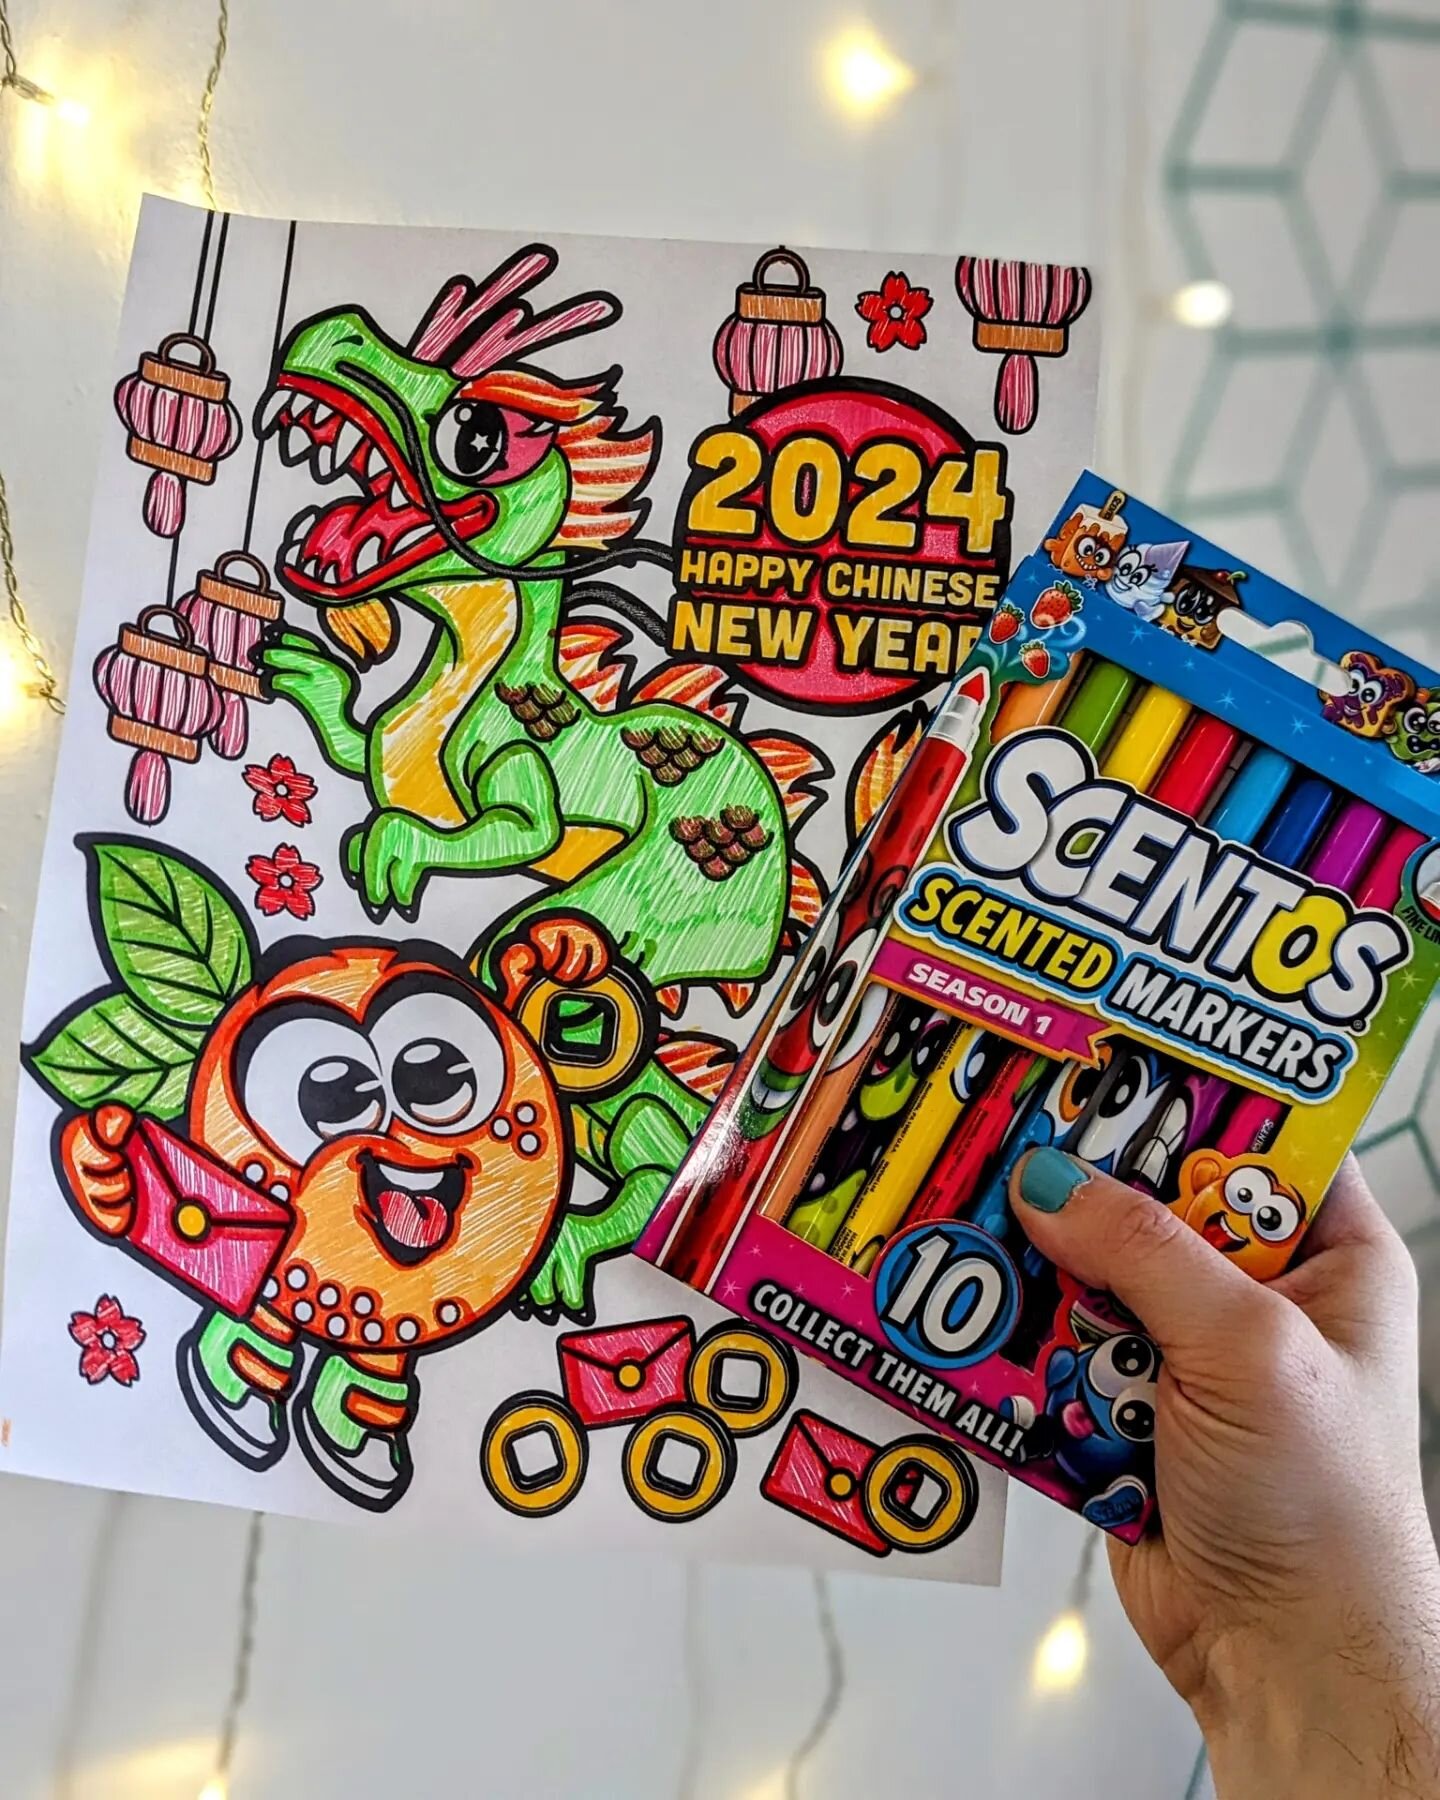 🐉🐉🐉 Happy Chinese New Year &mdash; it's the Year of the Dragon! Wishing everyone success and great fortune this year ❤️

Swipe to get your own Scentos Chinese New Year coloring sheet &amp; have some coloring fun with your kiddos to celebrate! 🏮🧧